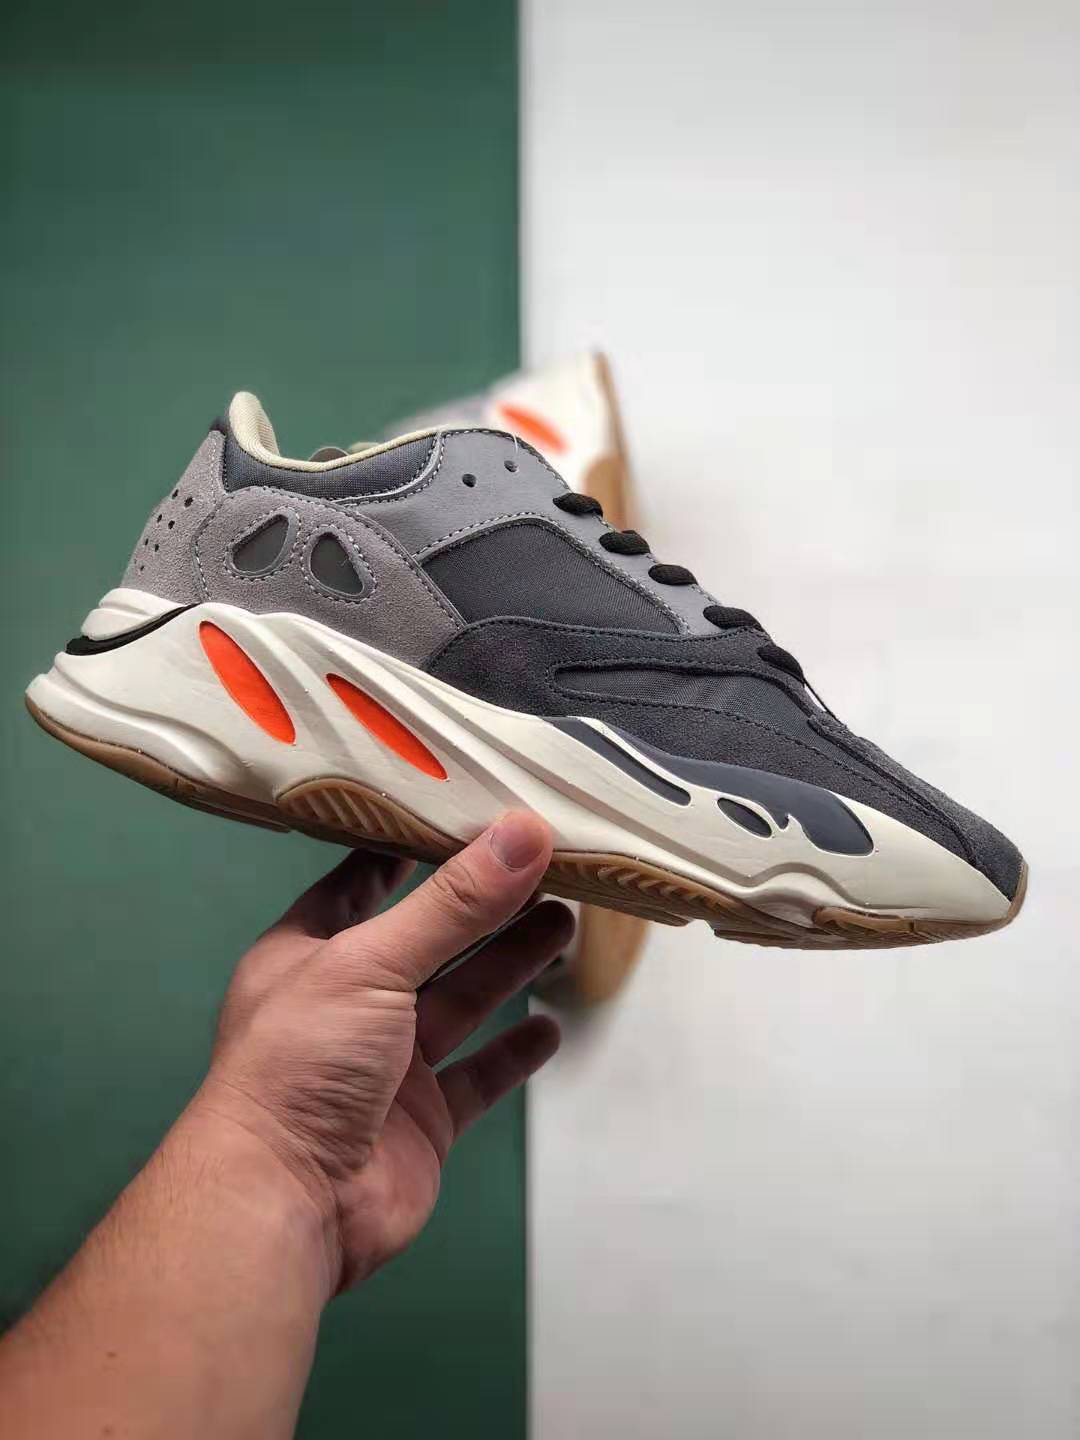 Adidas Yeezy Boost 700 'Magnet' FV9922 - Iconic Style and Unmatched Comfort